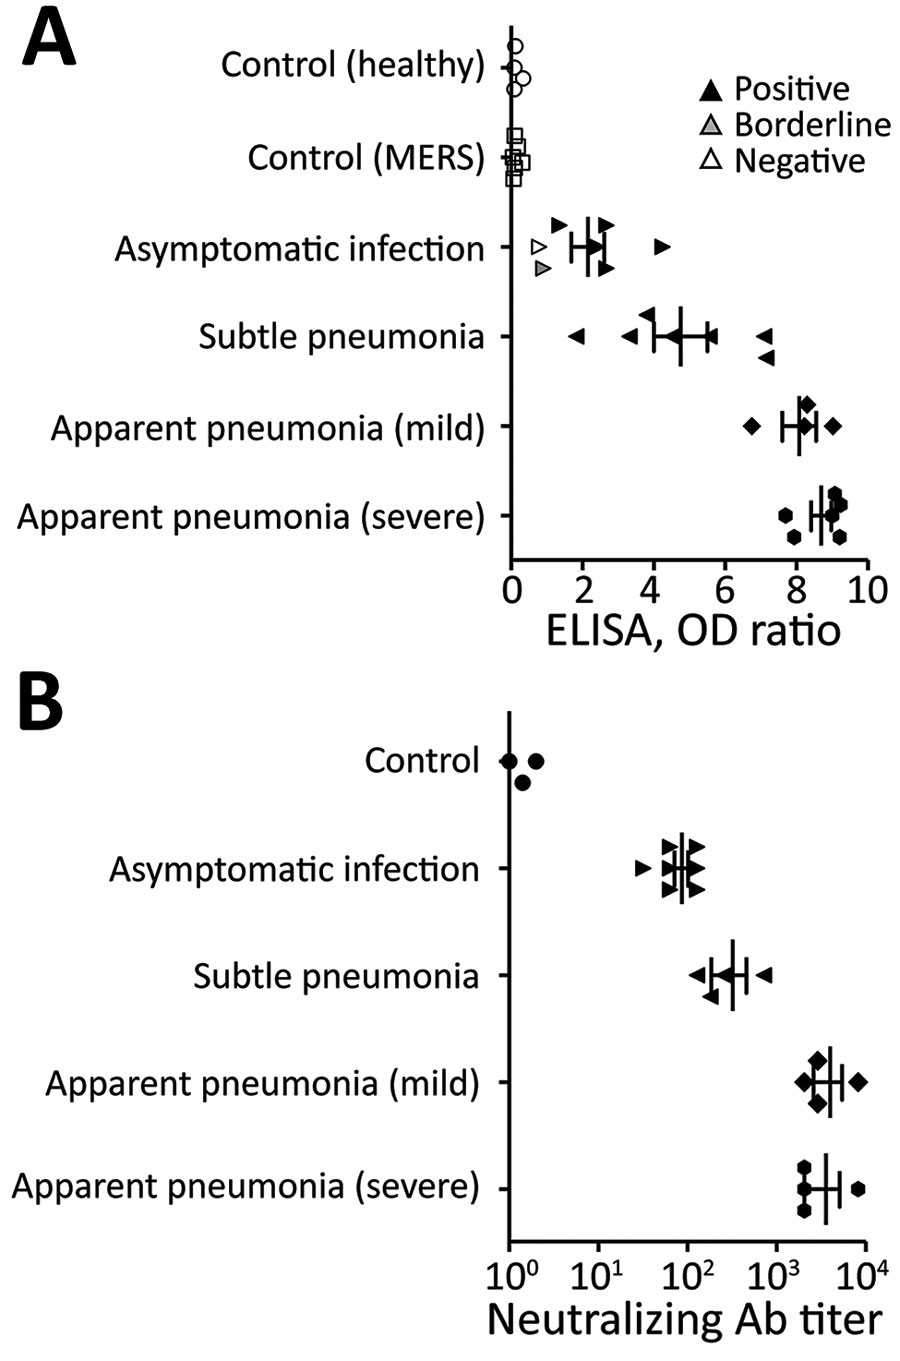 Antibody response against severe acute respiratory syndrome coronavirus 2 at 8 weeks postinfection among patients and controls in South Korea. A) Serologic diagnostic test (ELISA) results. OD ratio indicates the ratio of the extinction of the patient sample over the extinction of the calibrator. B) Neutralization assay results. For each patient type, an outlined symbol indicates a negative test result, gray symbol a borderline result, and black symbol a positive result, as tested according to ma